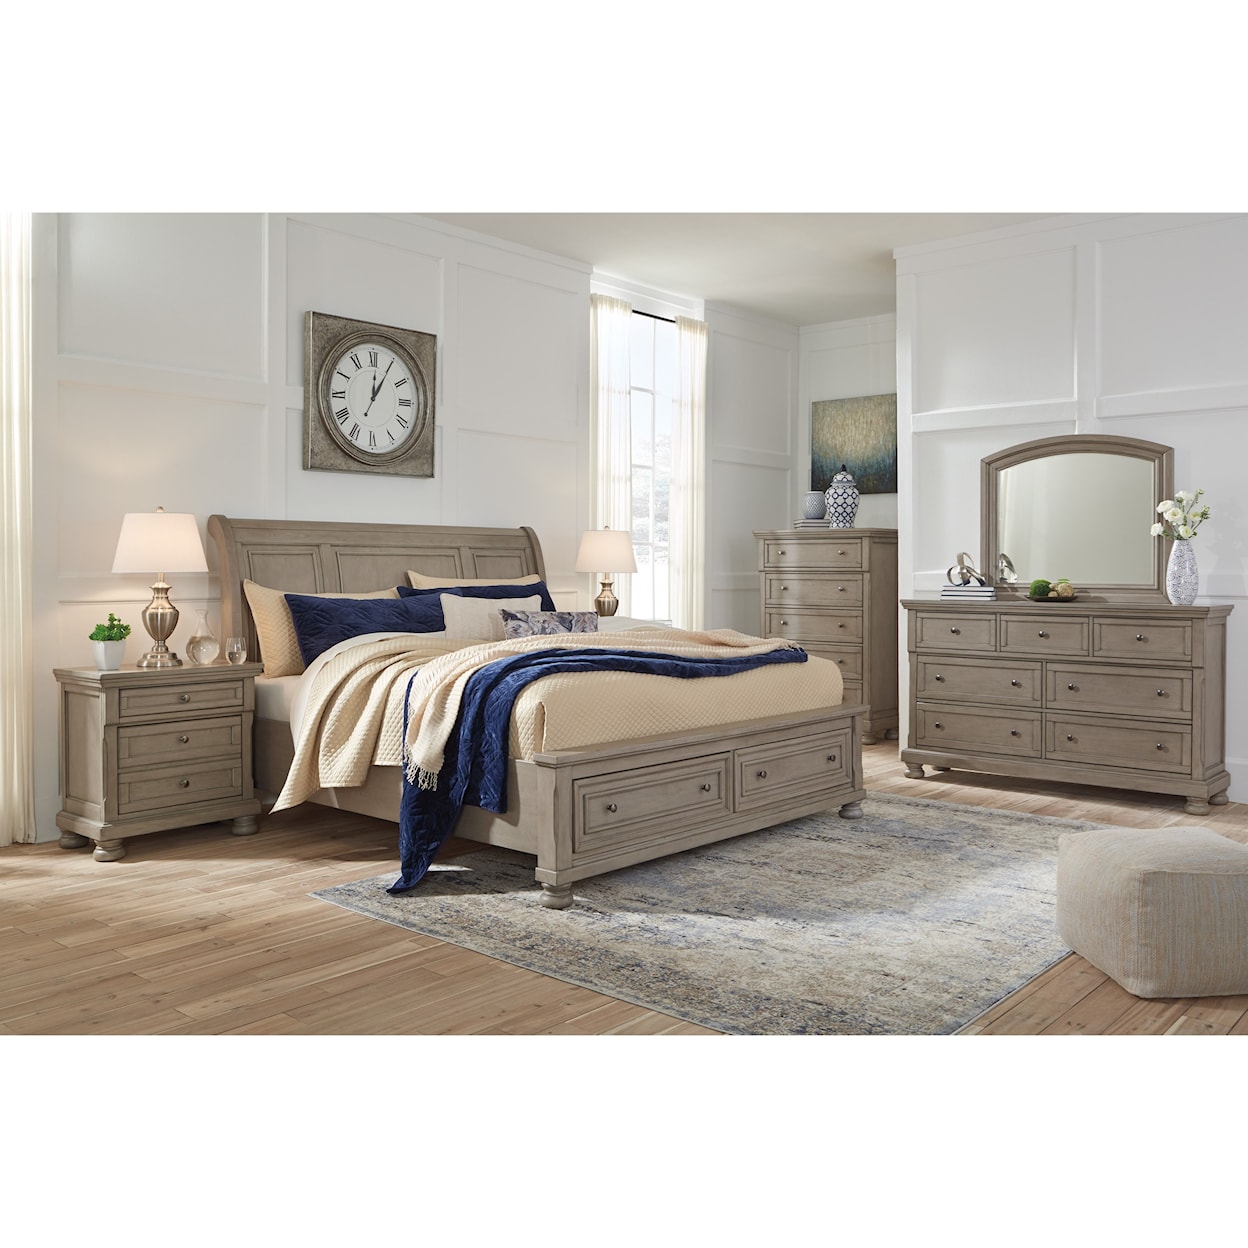 Signature Design by Ashley Lettner 7pc King Bedroom Group